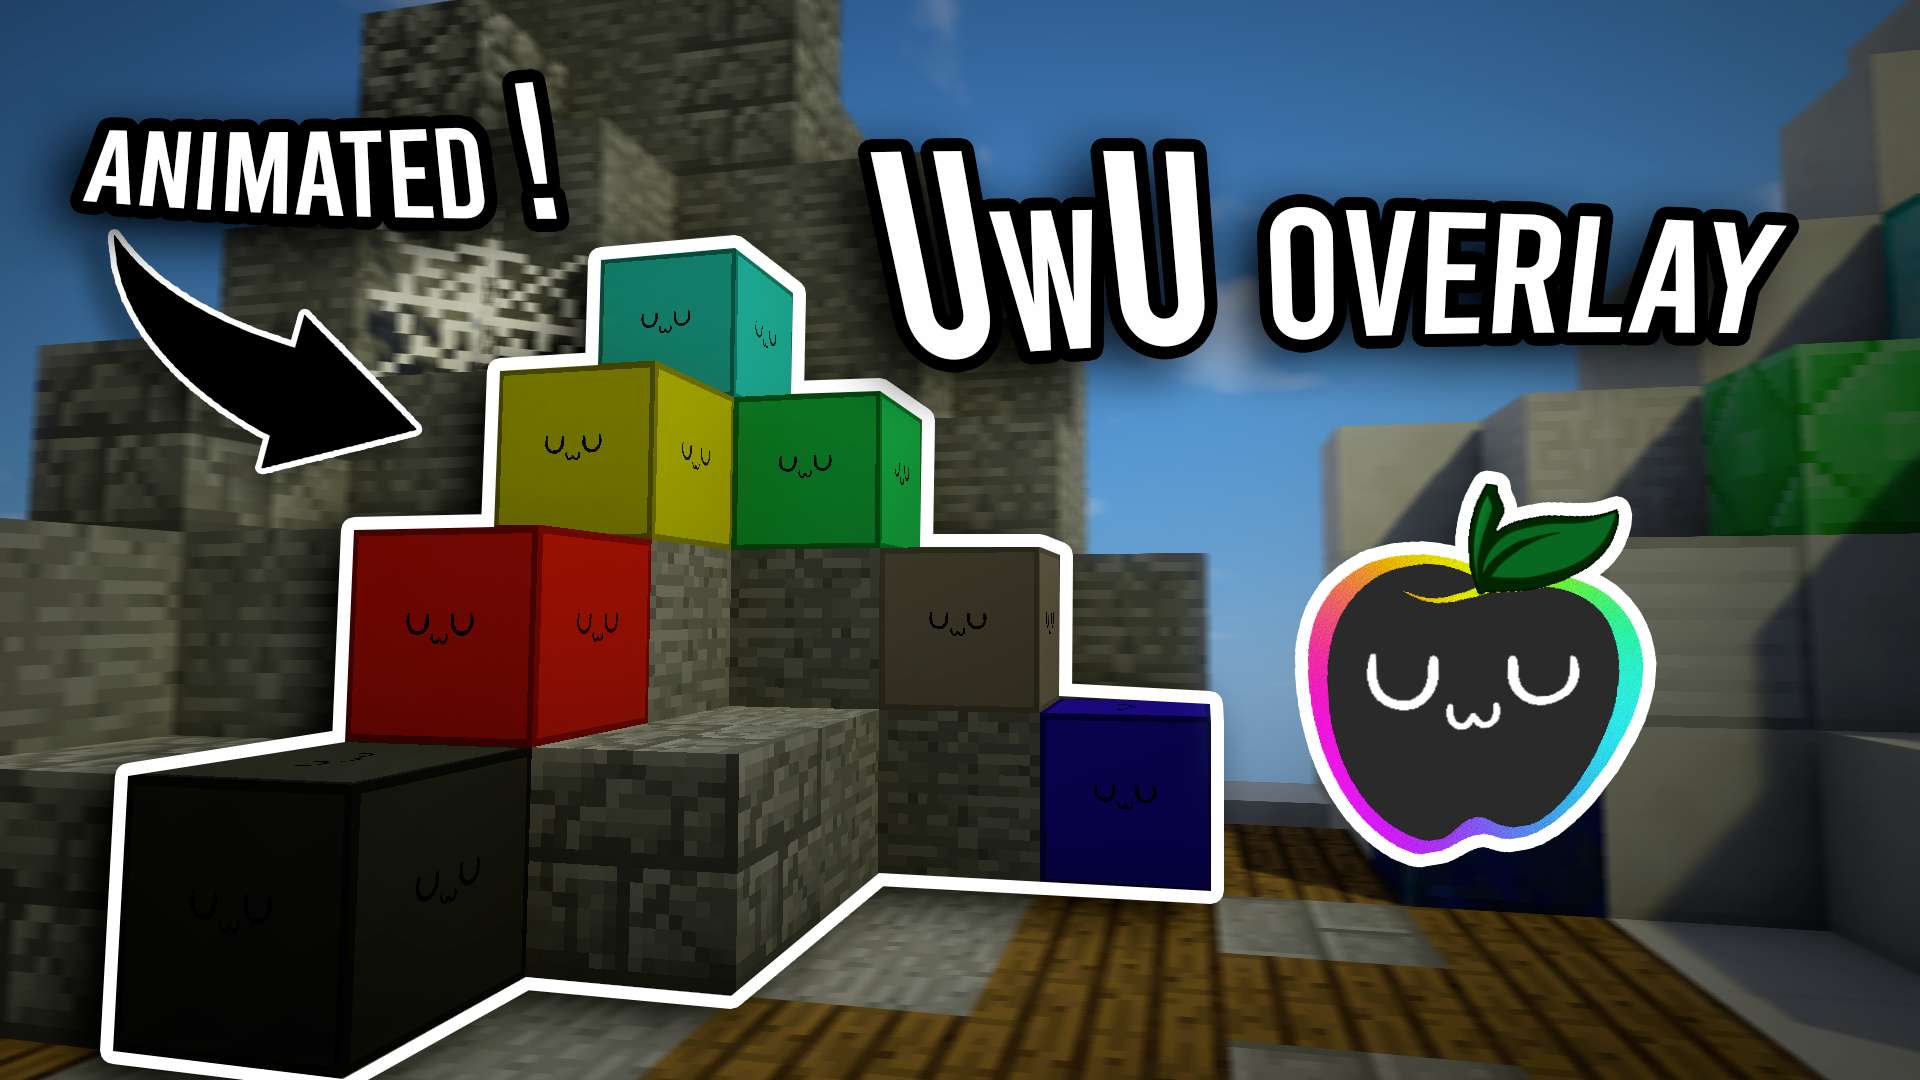 UwU overlay v2 (animated) 512x by Likorrne on PvPRP